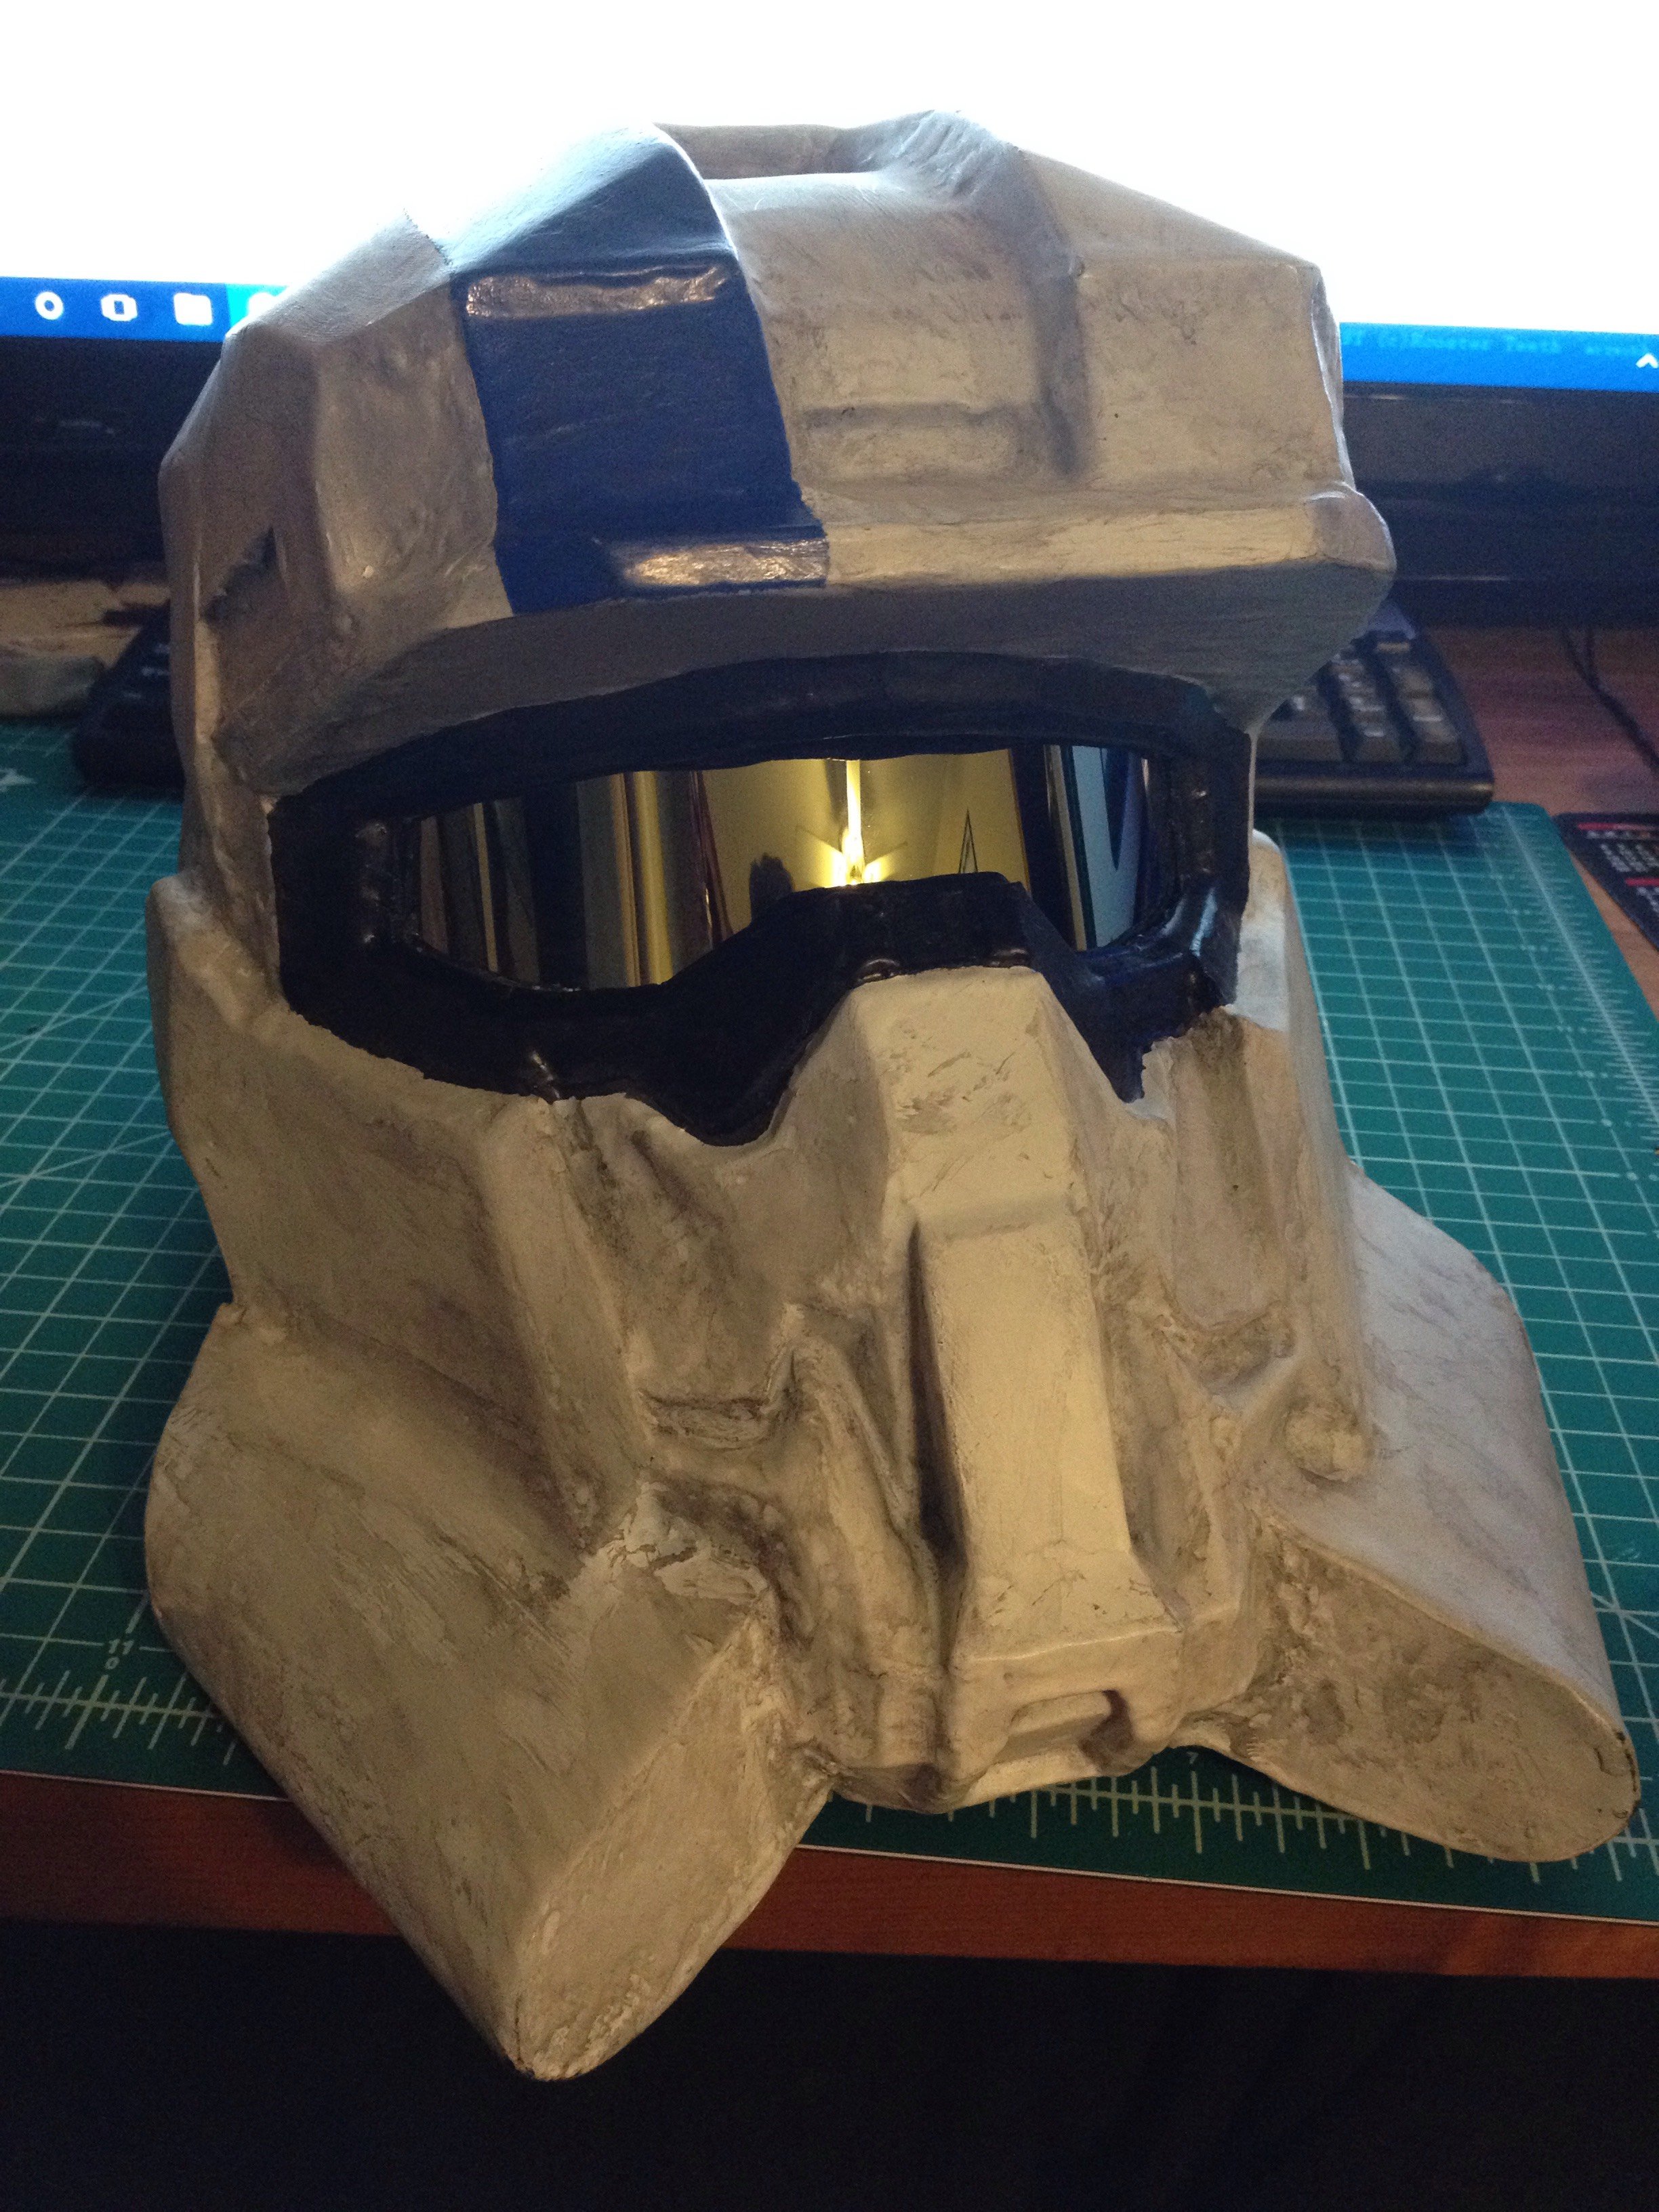 Reach Eod Build | Halo Costume and Prop Maker Community - 405th